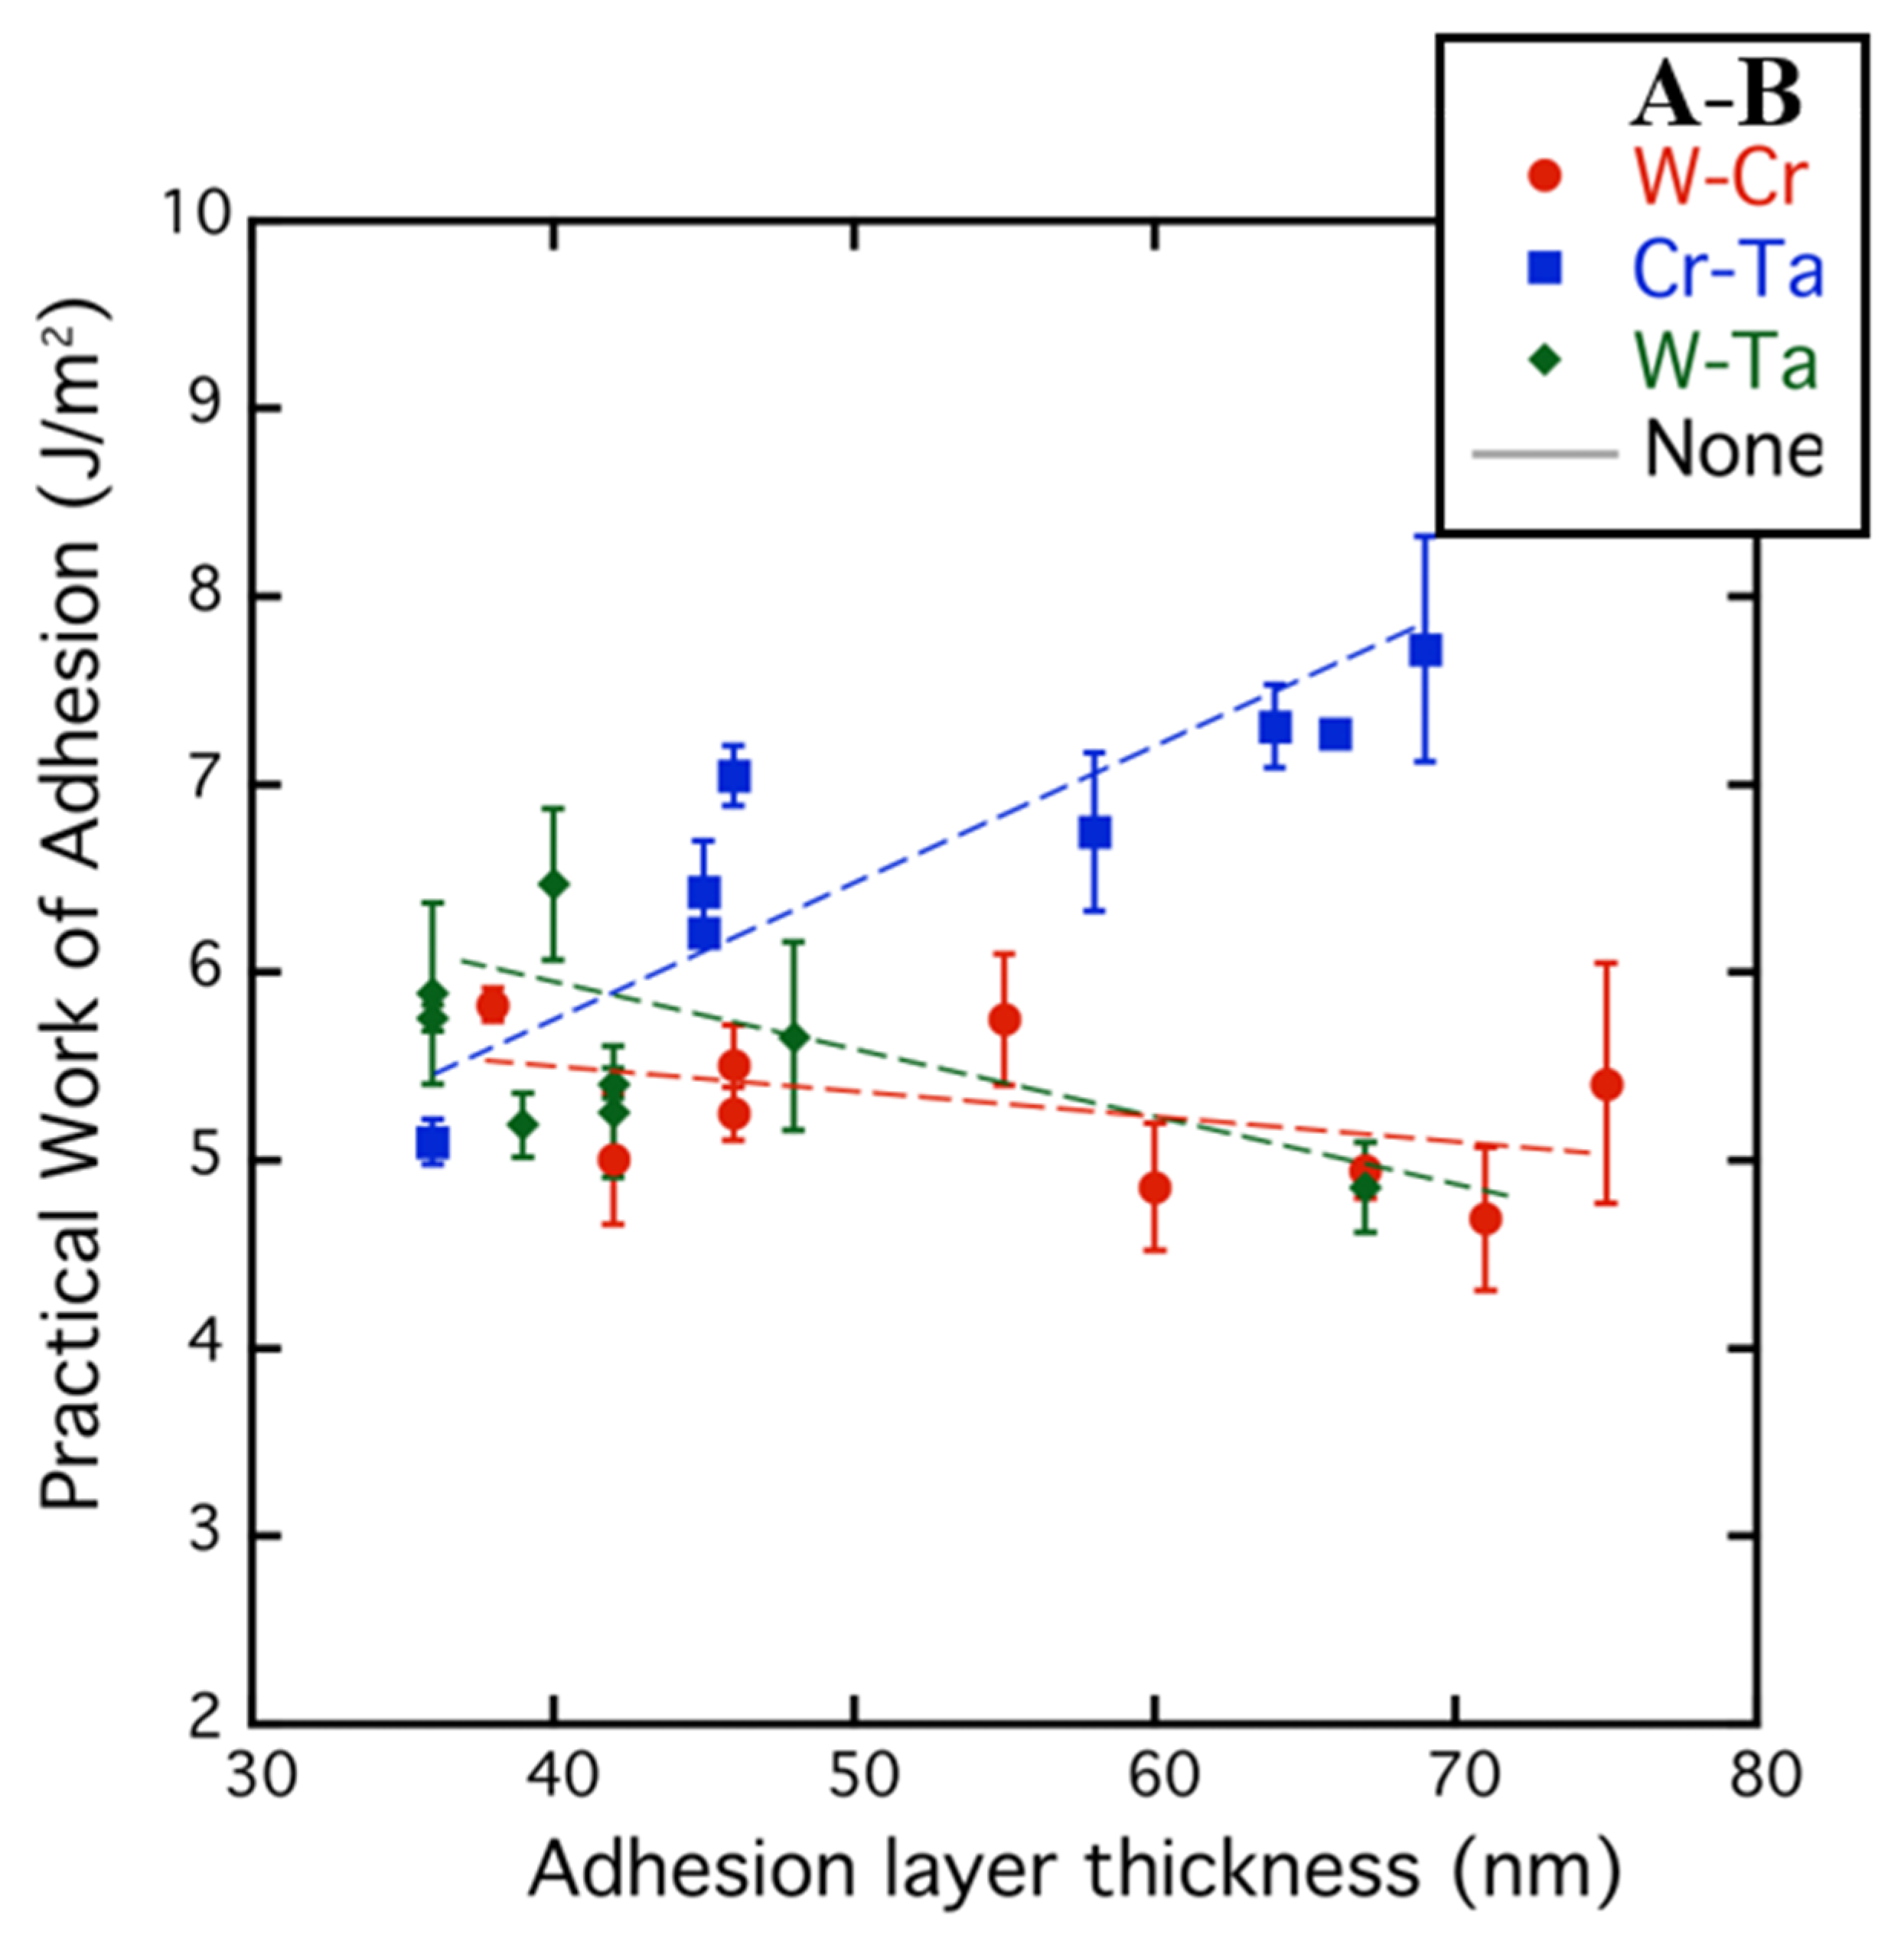 Crystals Free Full Text Combinatorial Materials Design Approach To Investigate Adhesion Layer Chemistry For Optimal Interfacial Adhesion Strength Html